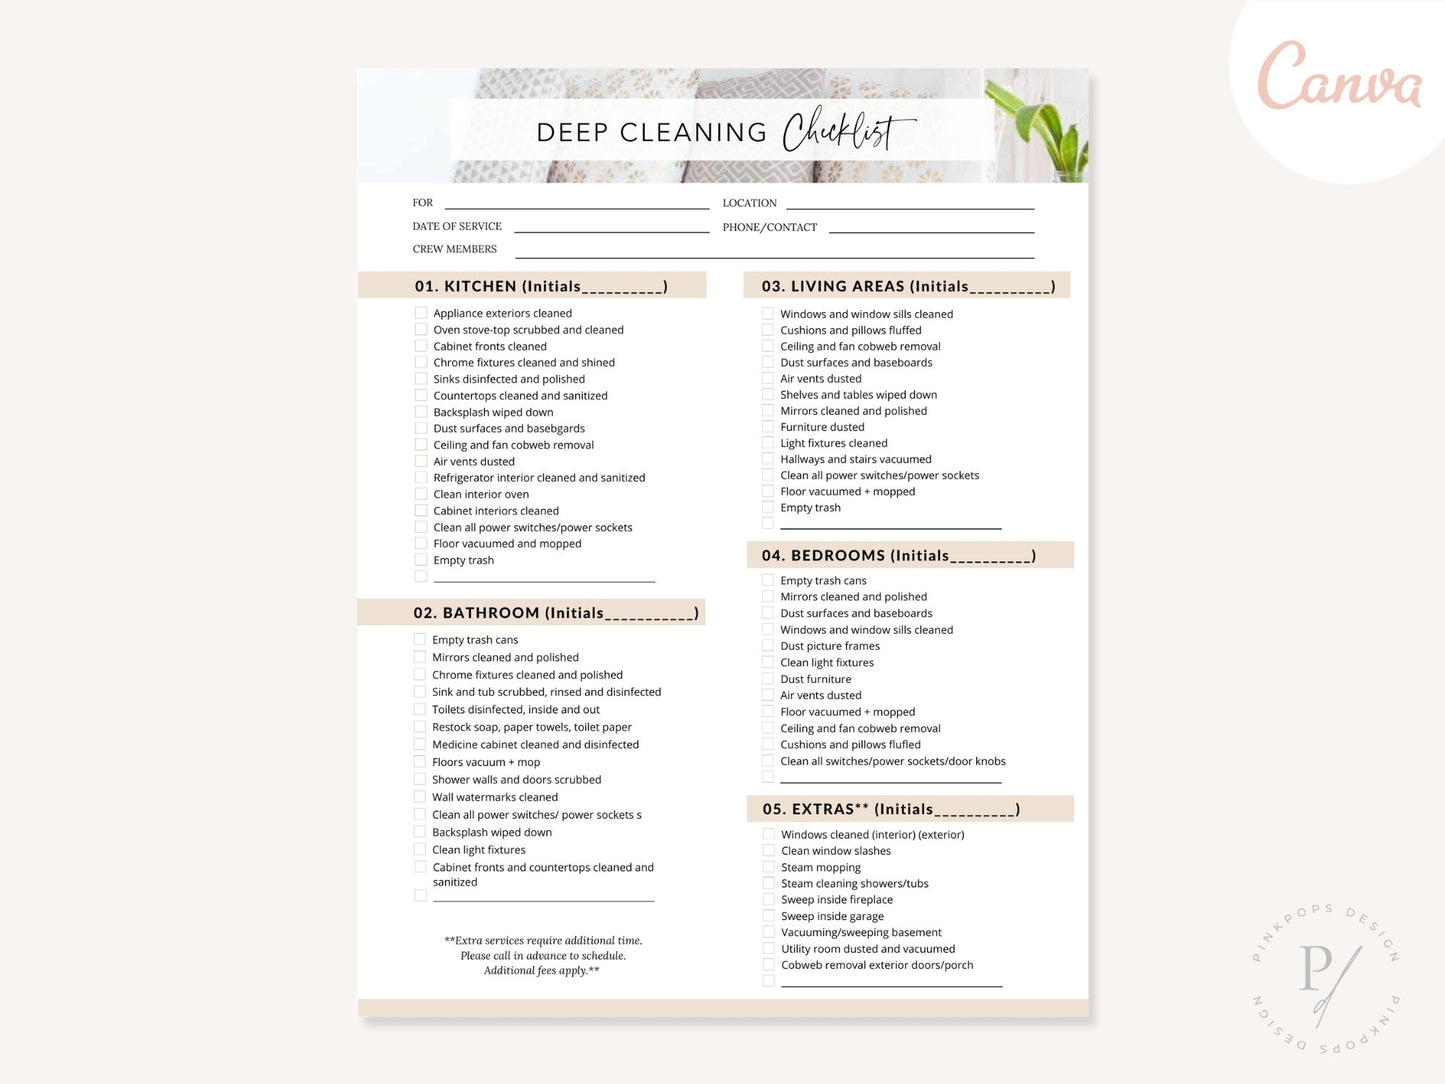 Deep Cleaning Checklist - Editable template for ensuring a meticulous and organized approach to deep cleaning tasks, refreshing and maintaining a pristine environment.